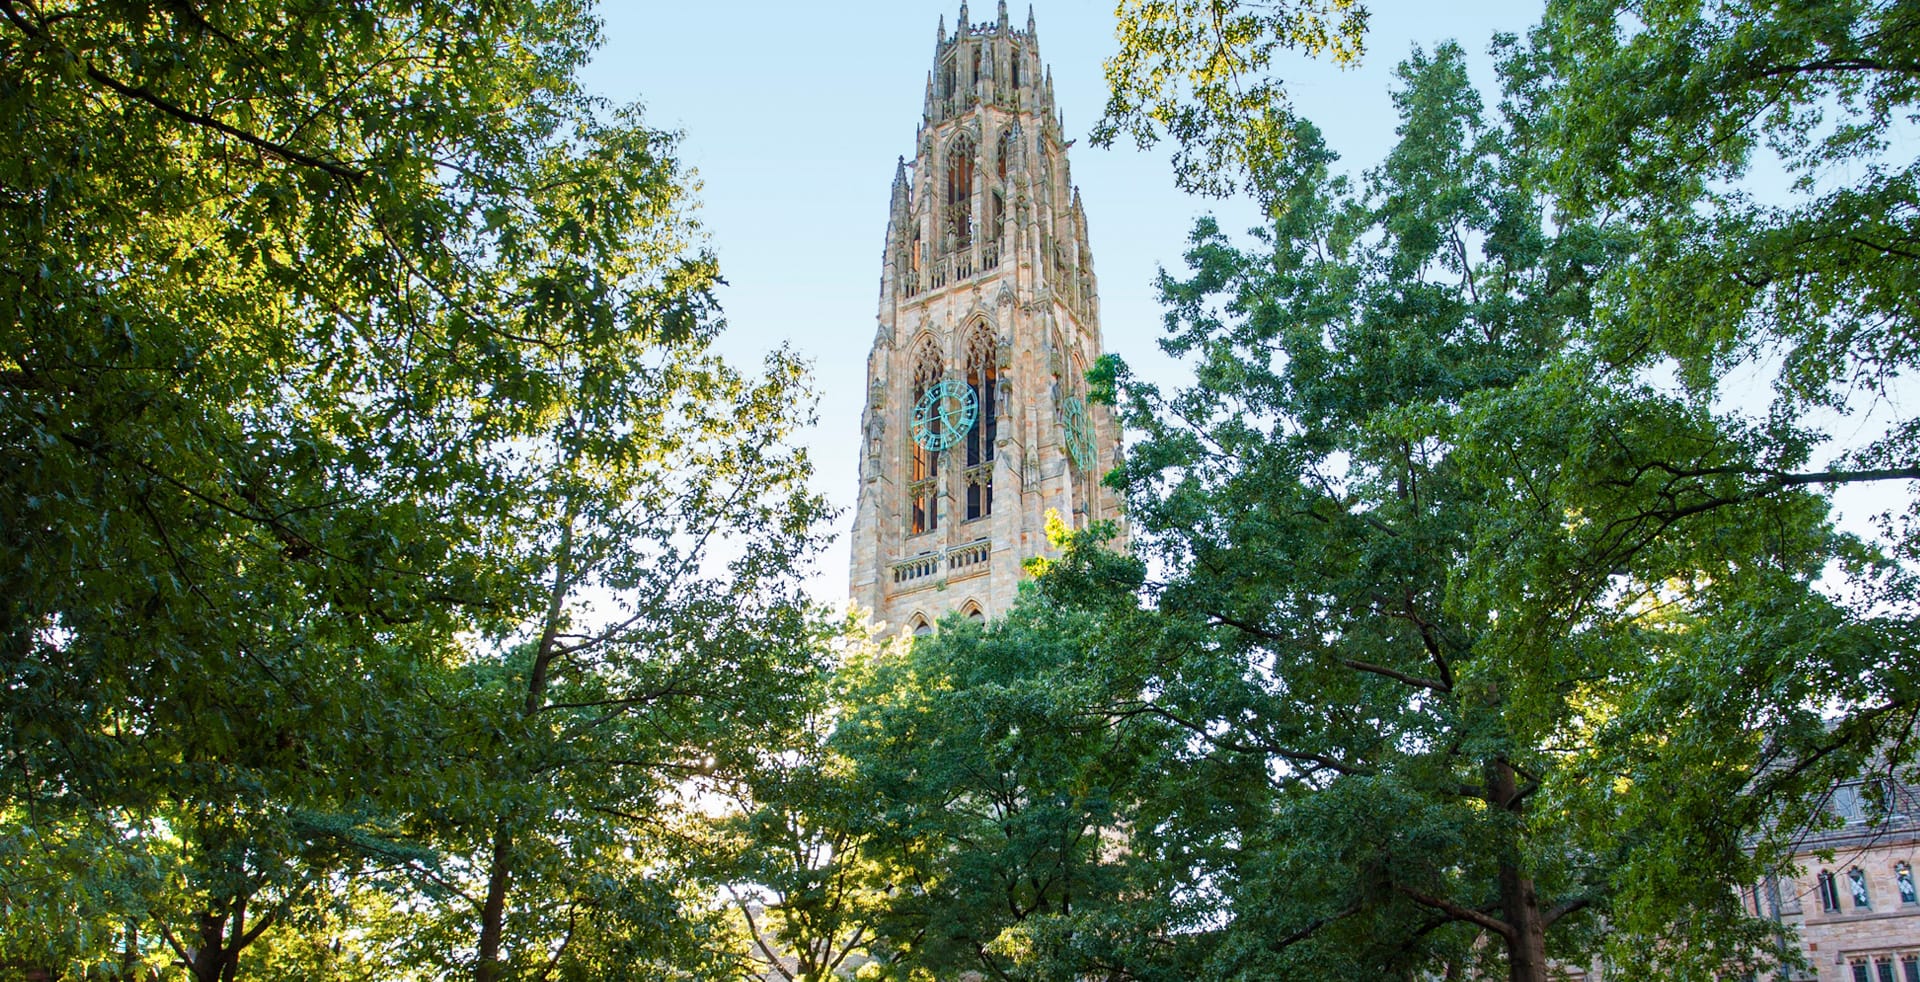 Harkness Tower at Yale